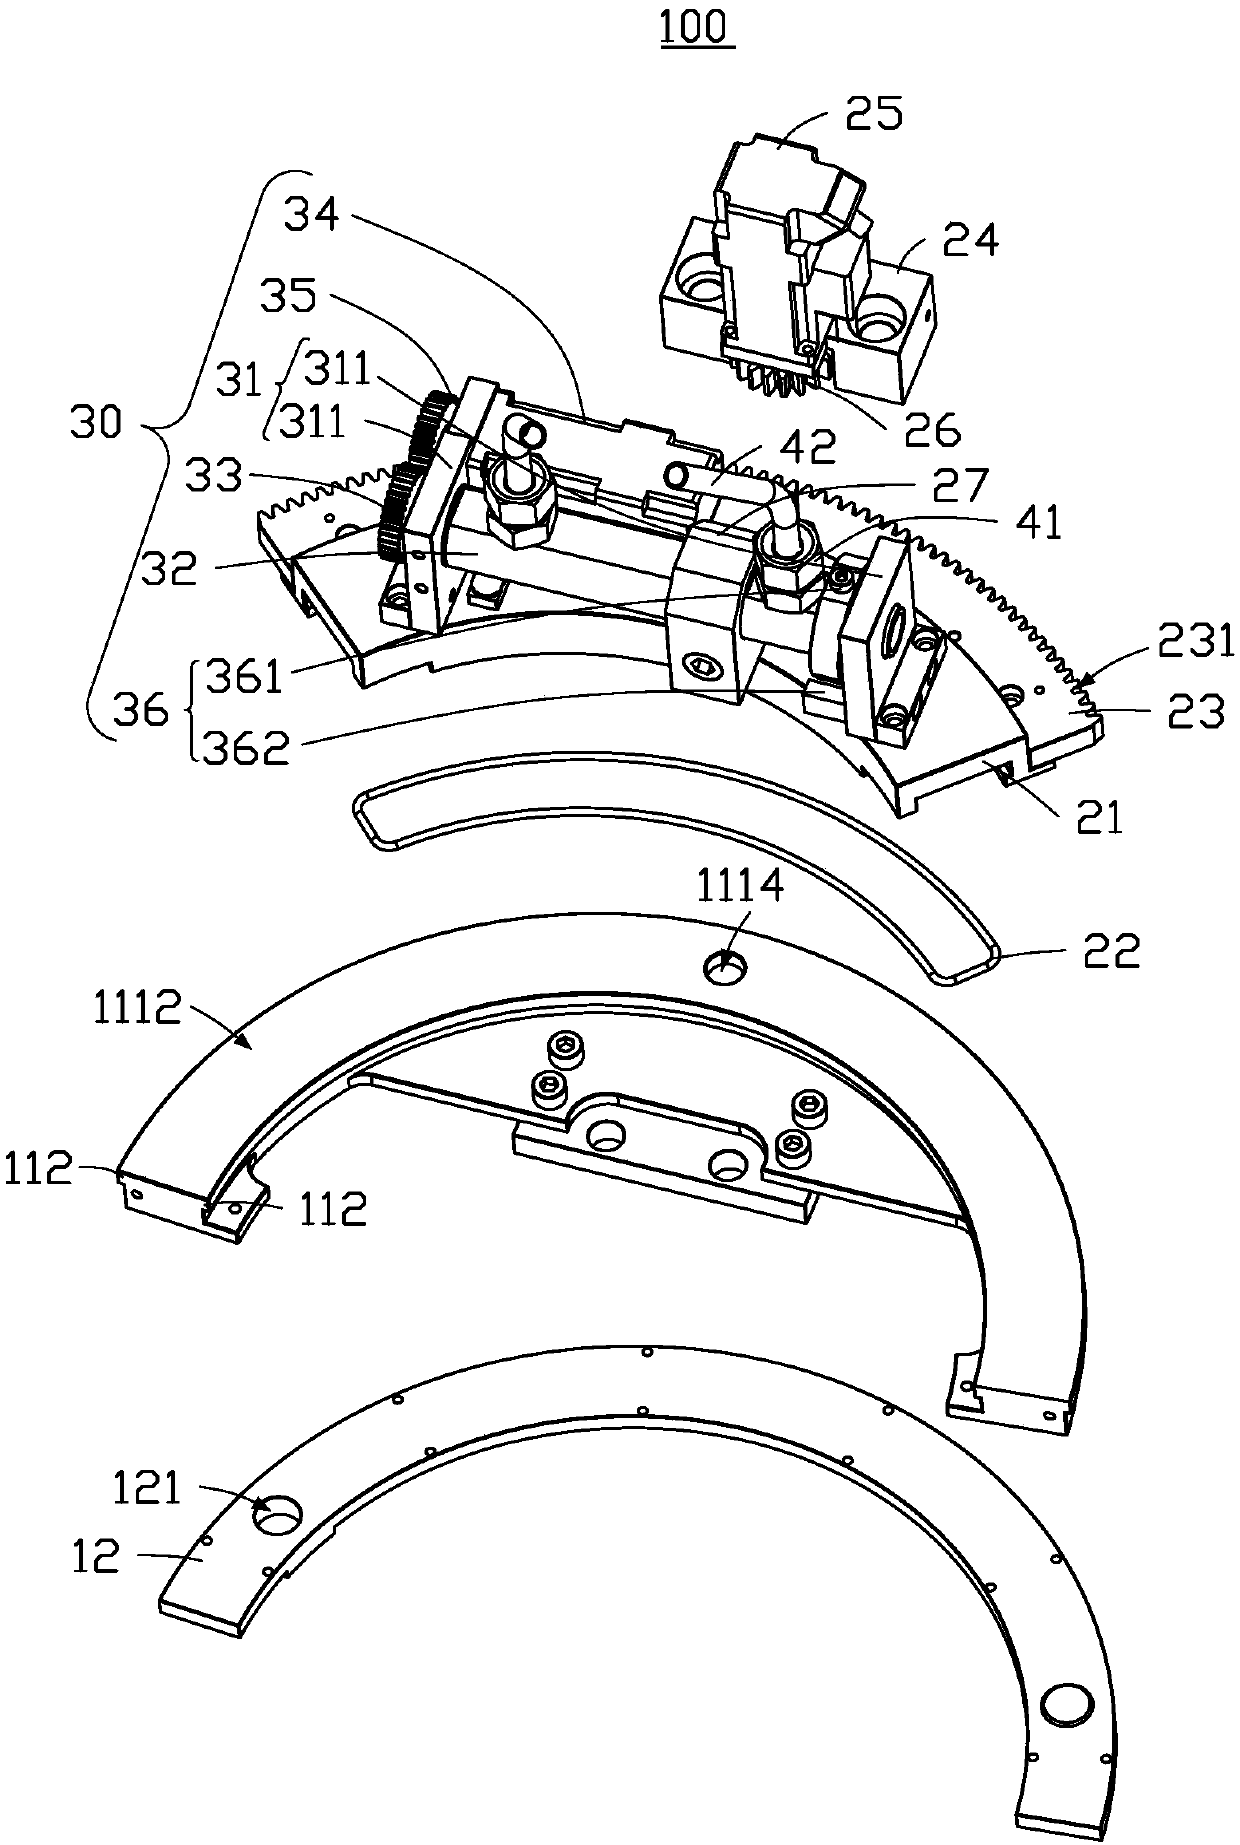 Spraying and cooling device